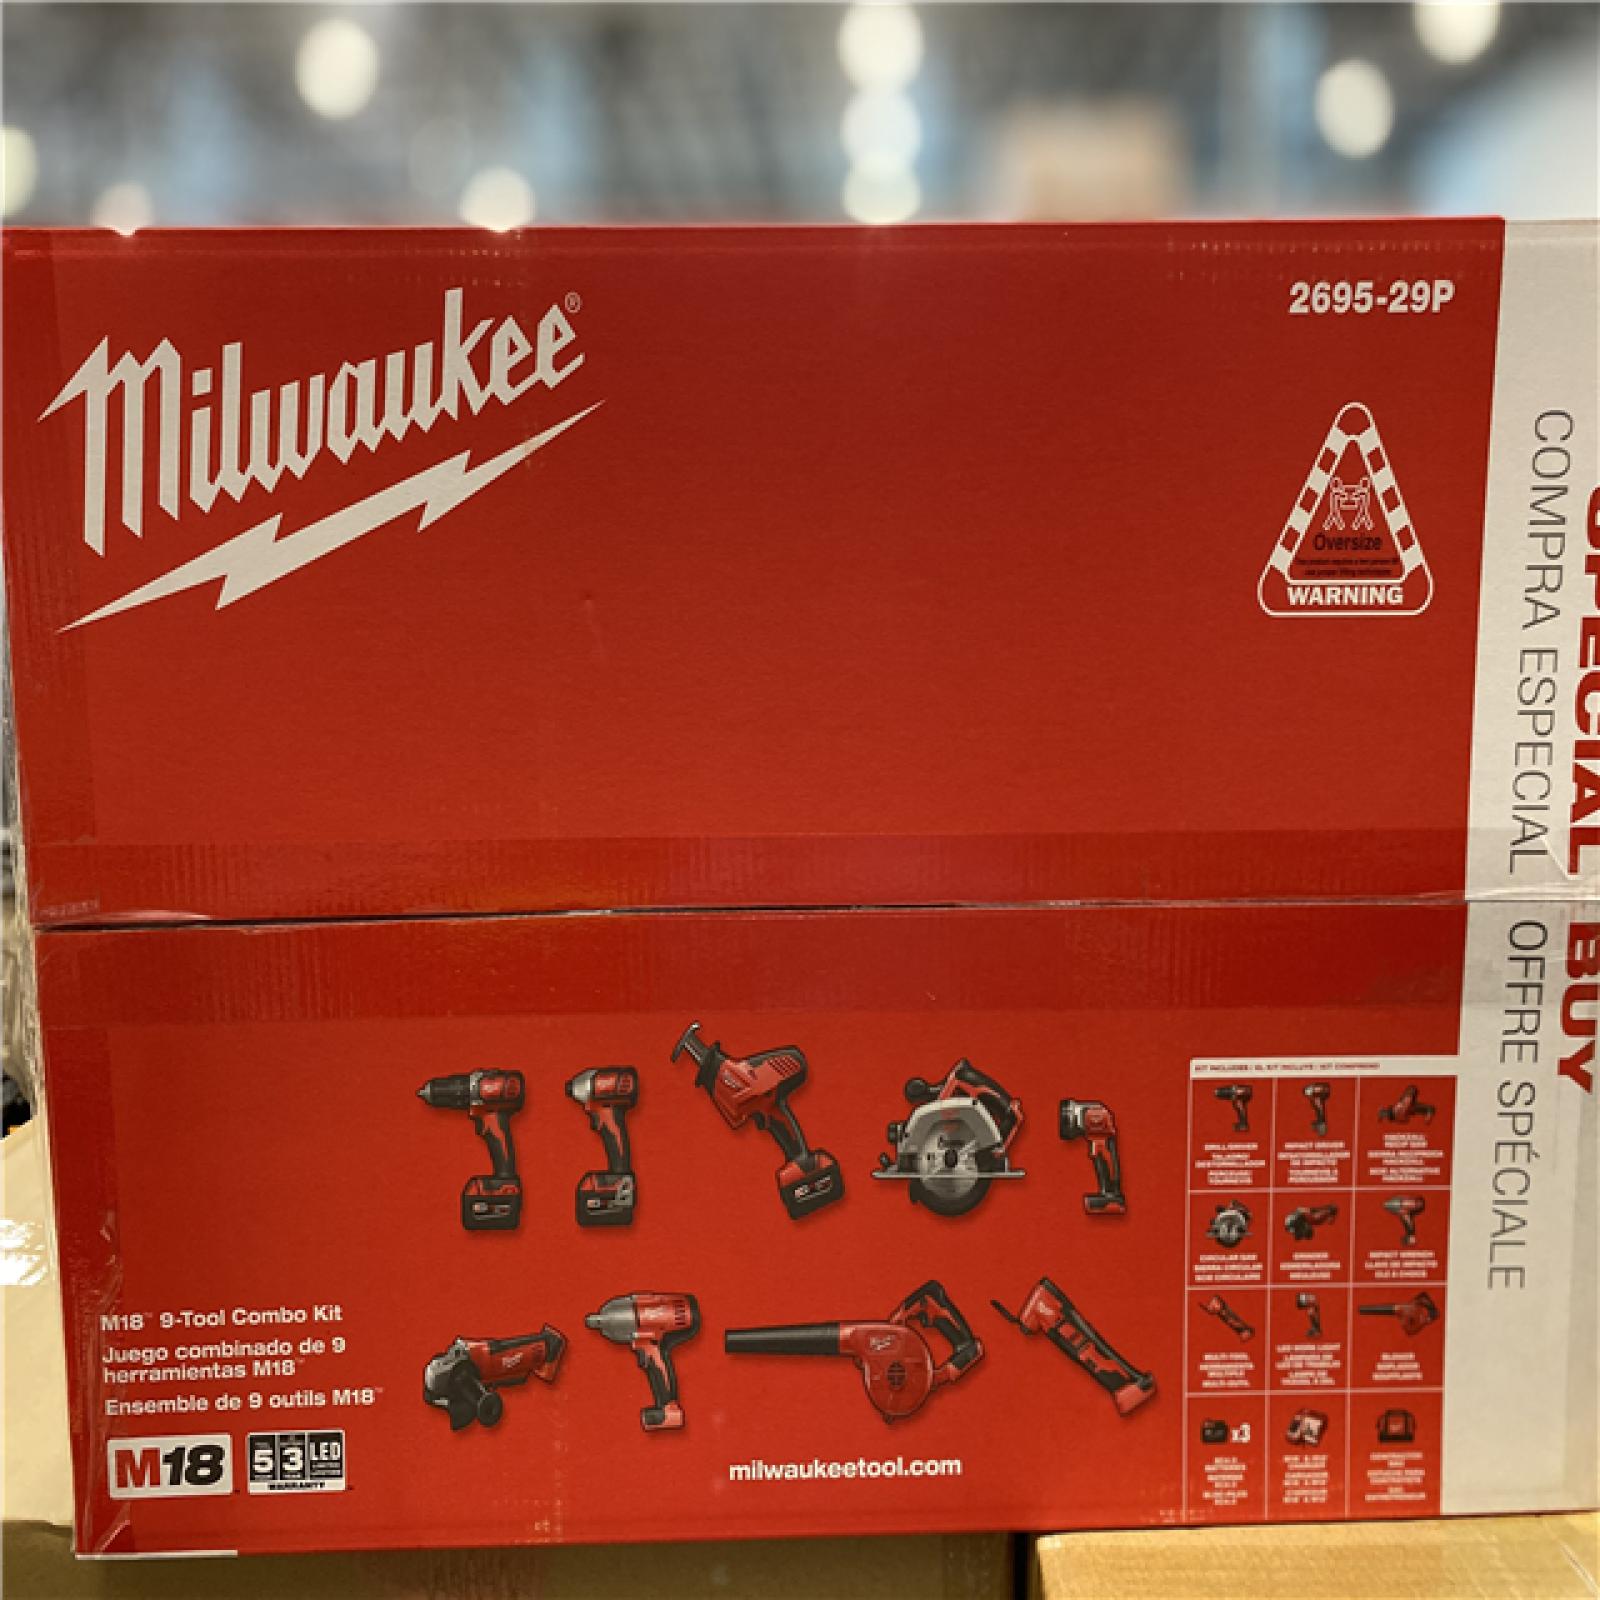 NEW! - Milwaukee M18 Cordless 9-Tool Combo Kit w/ (3) 4.0Ah Batteries & Charger